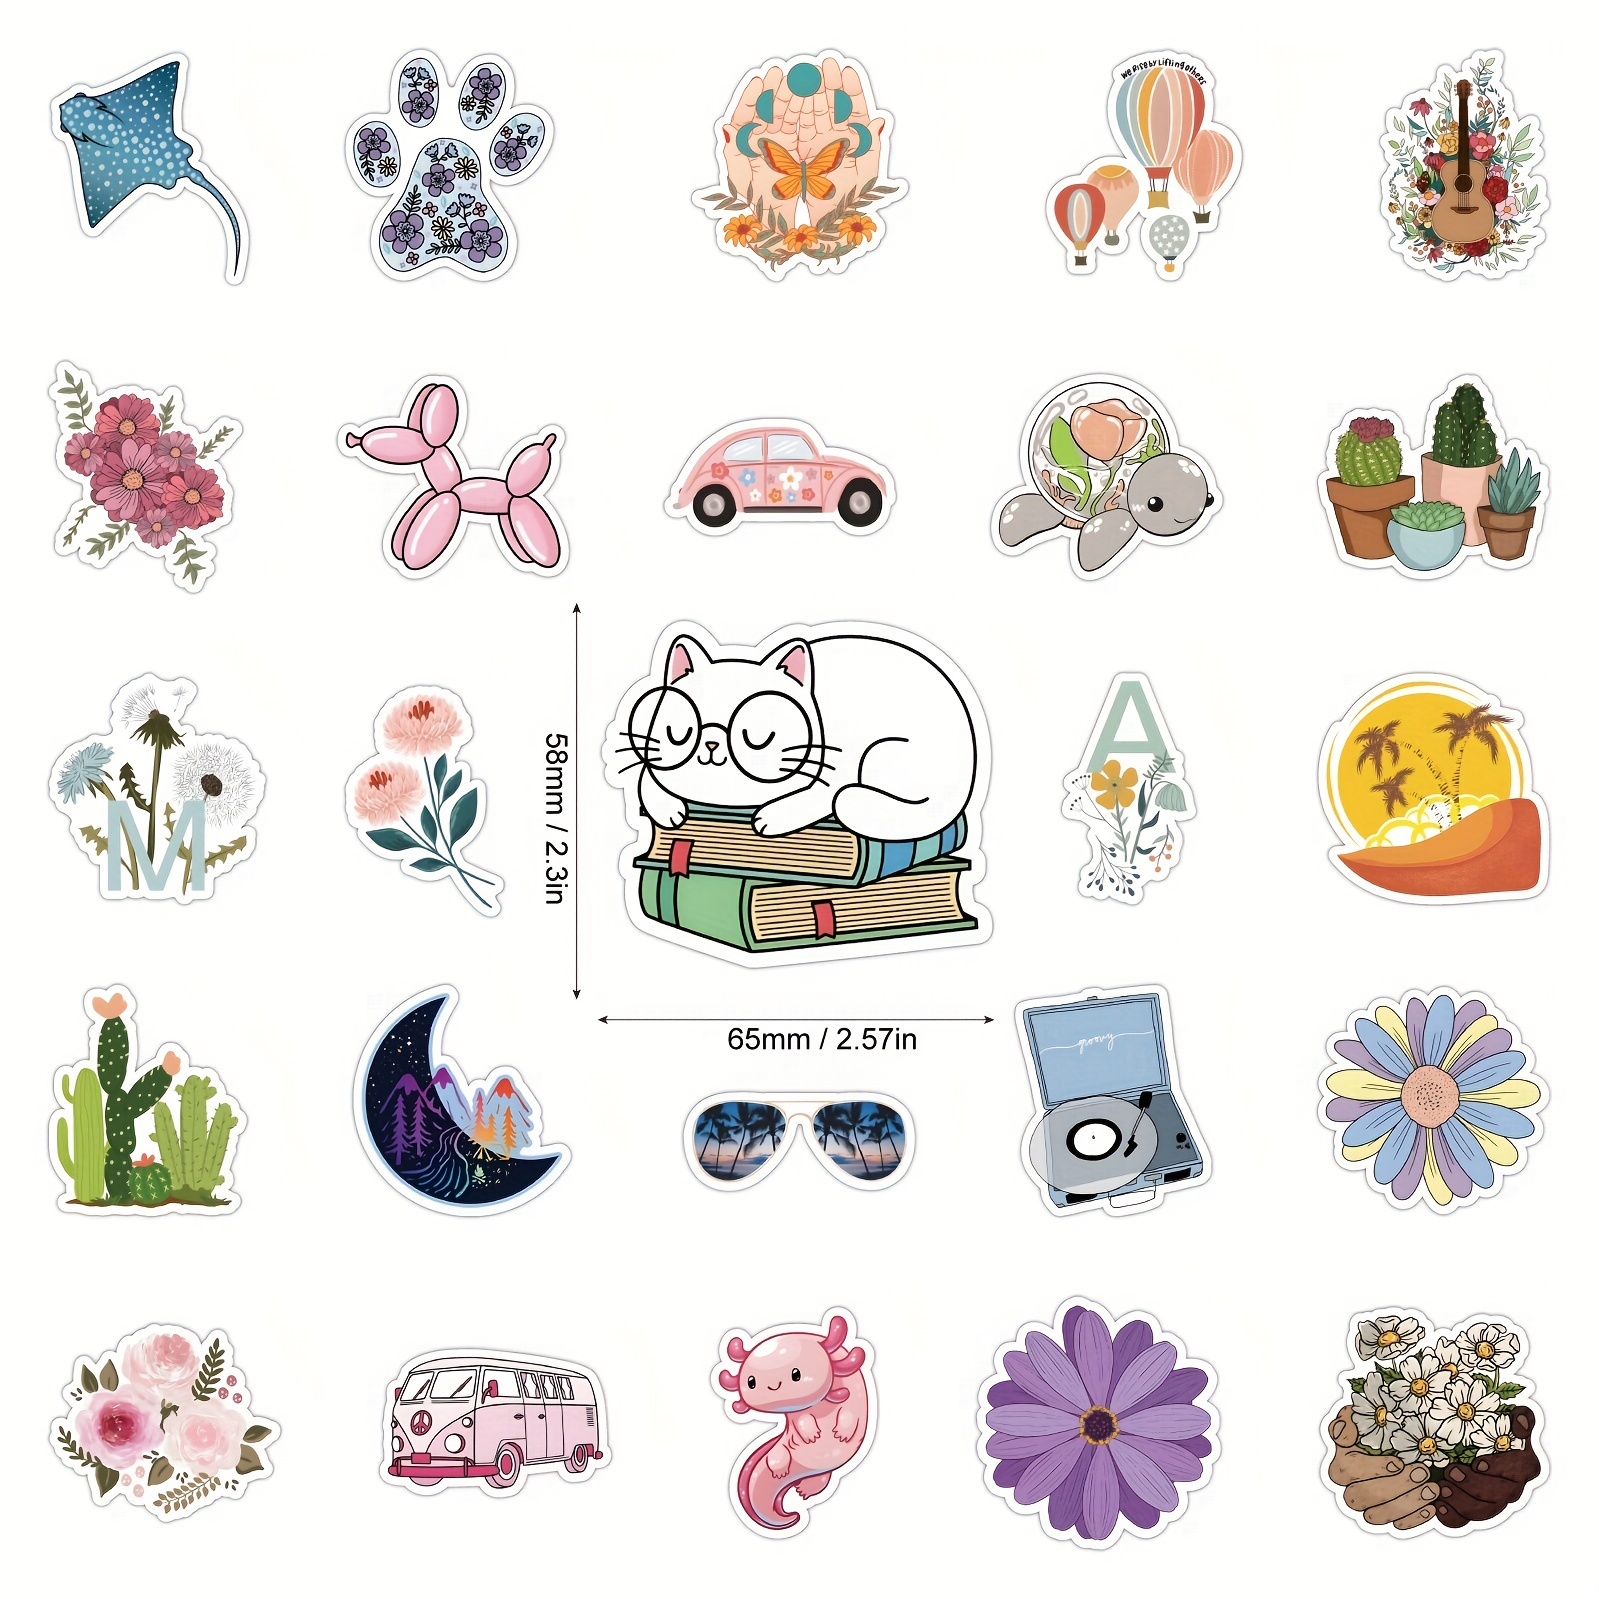 100pcs Cute Stickers for Water Bottles Laptop, Vsco Aethetic Stickers for Adult Teen Girls Kids, Waterproof Vinyl Kwaii Stickers Pack for Hydro Flask